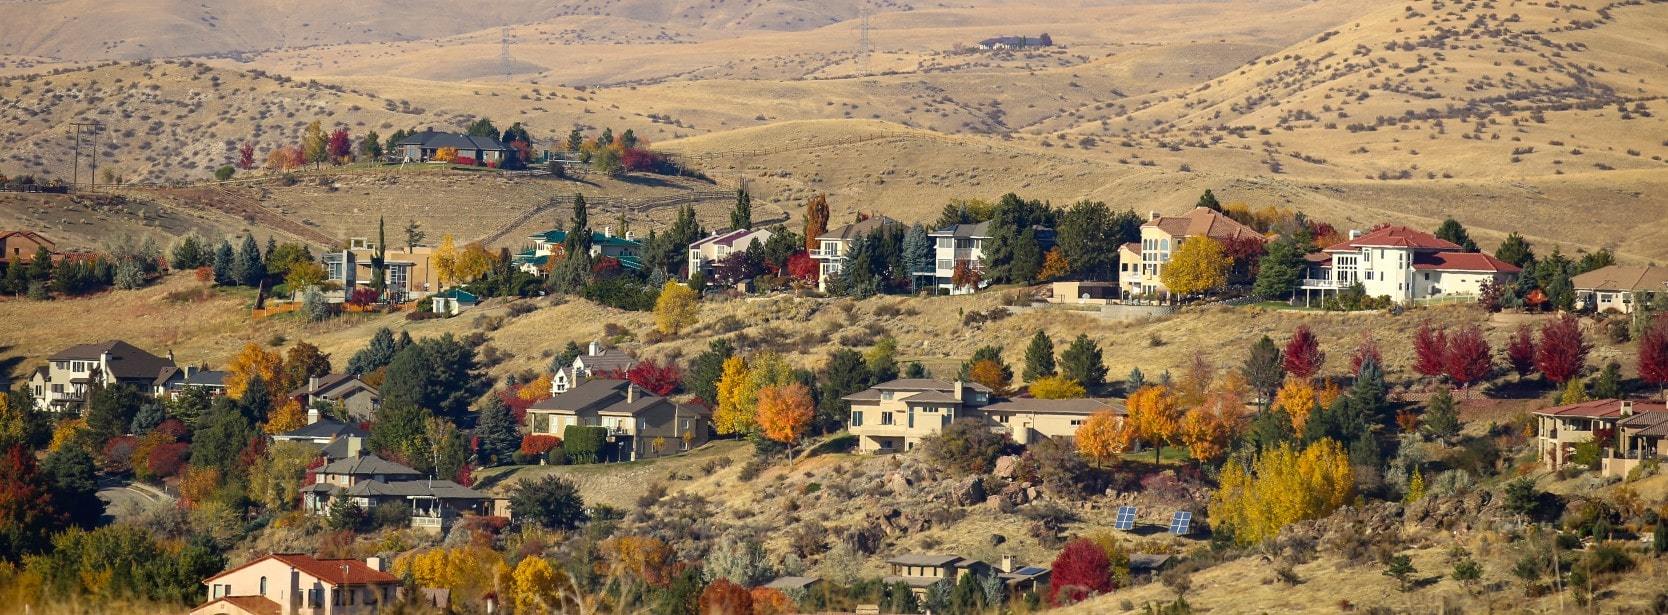 North end Boise real estate in the foothills